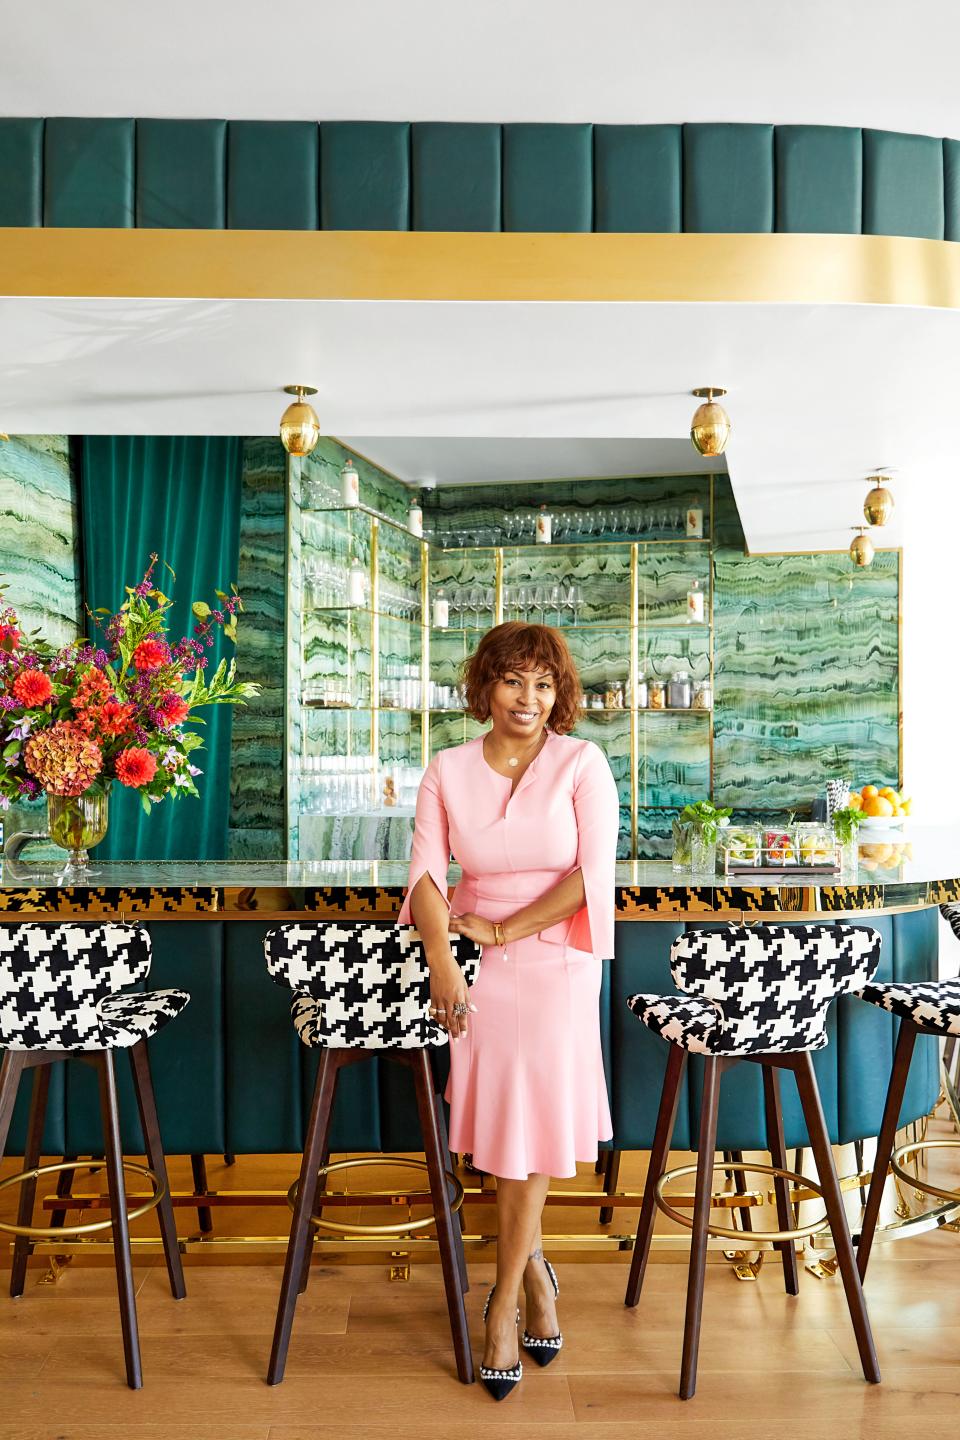 AD100 designer Brigette Romanek in the bar she conceived for the Allbright Club.